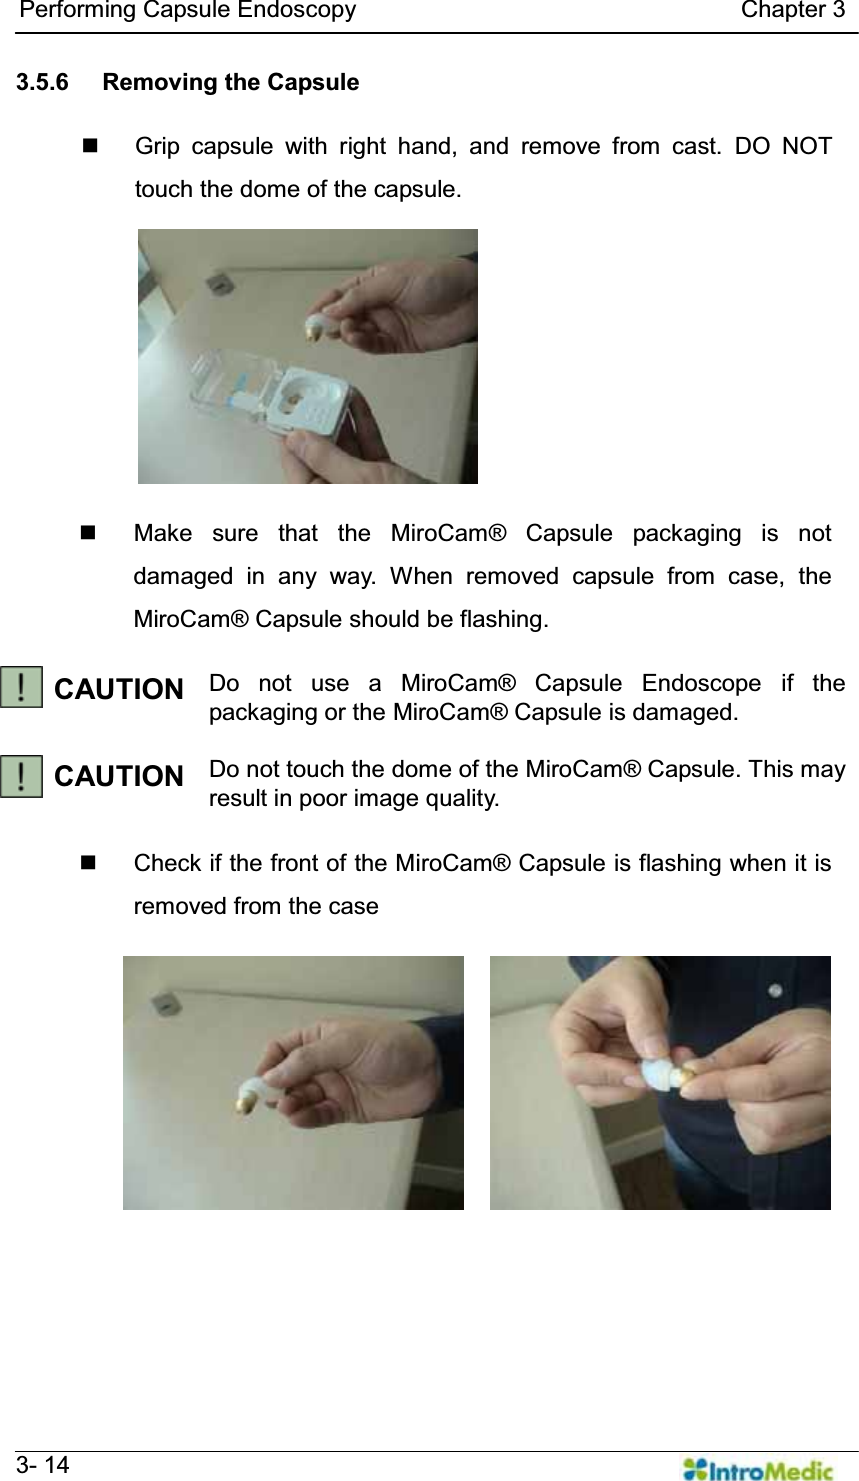   Performing Capsule Endoscopy                                Chapter 3   3- 14 3.5.6  Removing the Capsule    Grip capsule with right hand, and remove from cast. DO NOT touch the dome of the capsule.    Make sure that the MiroCam® Capsule packaging is not damaged in any way. When removed capsule from case, the MiroCam® Capsule should be flashing.  CAUTION Do not use a MiroCam® Capsule Endoscope if the packaging or the MiroCam® Capsule is damaged.   CAUTION Do not touch the dome of the MiroCam® Capsule. This may result in poor image quality.    Check if the front of the MiroCam® Capsule is flashing when it is removed from the case  